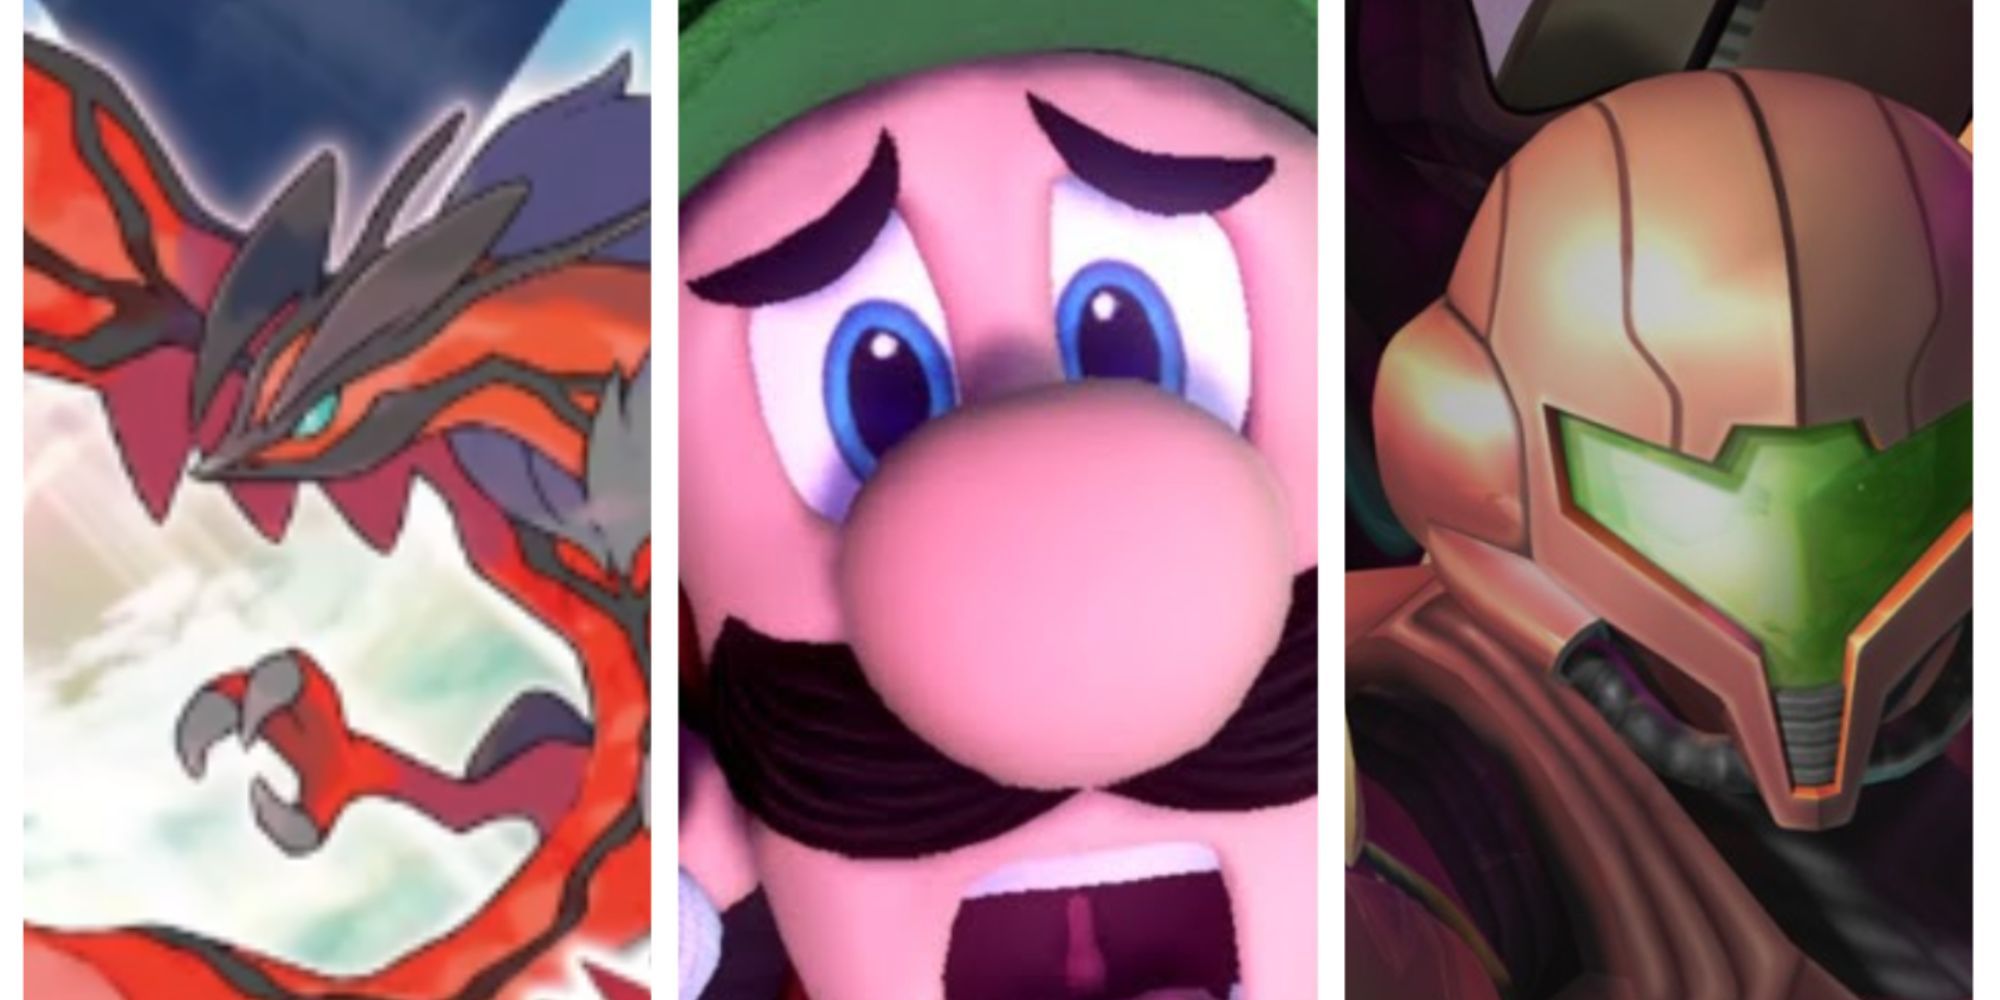 Dark and Twisted Nintendo Games